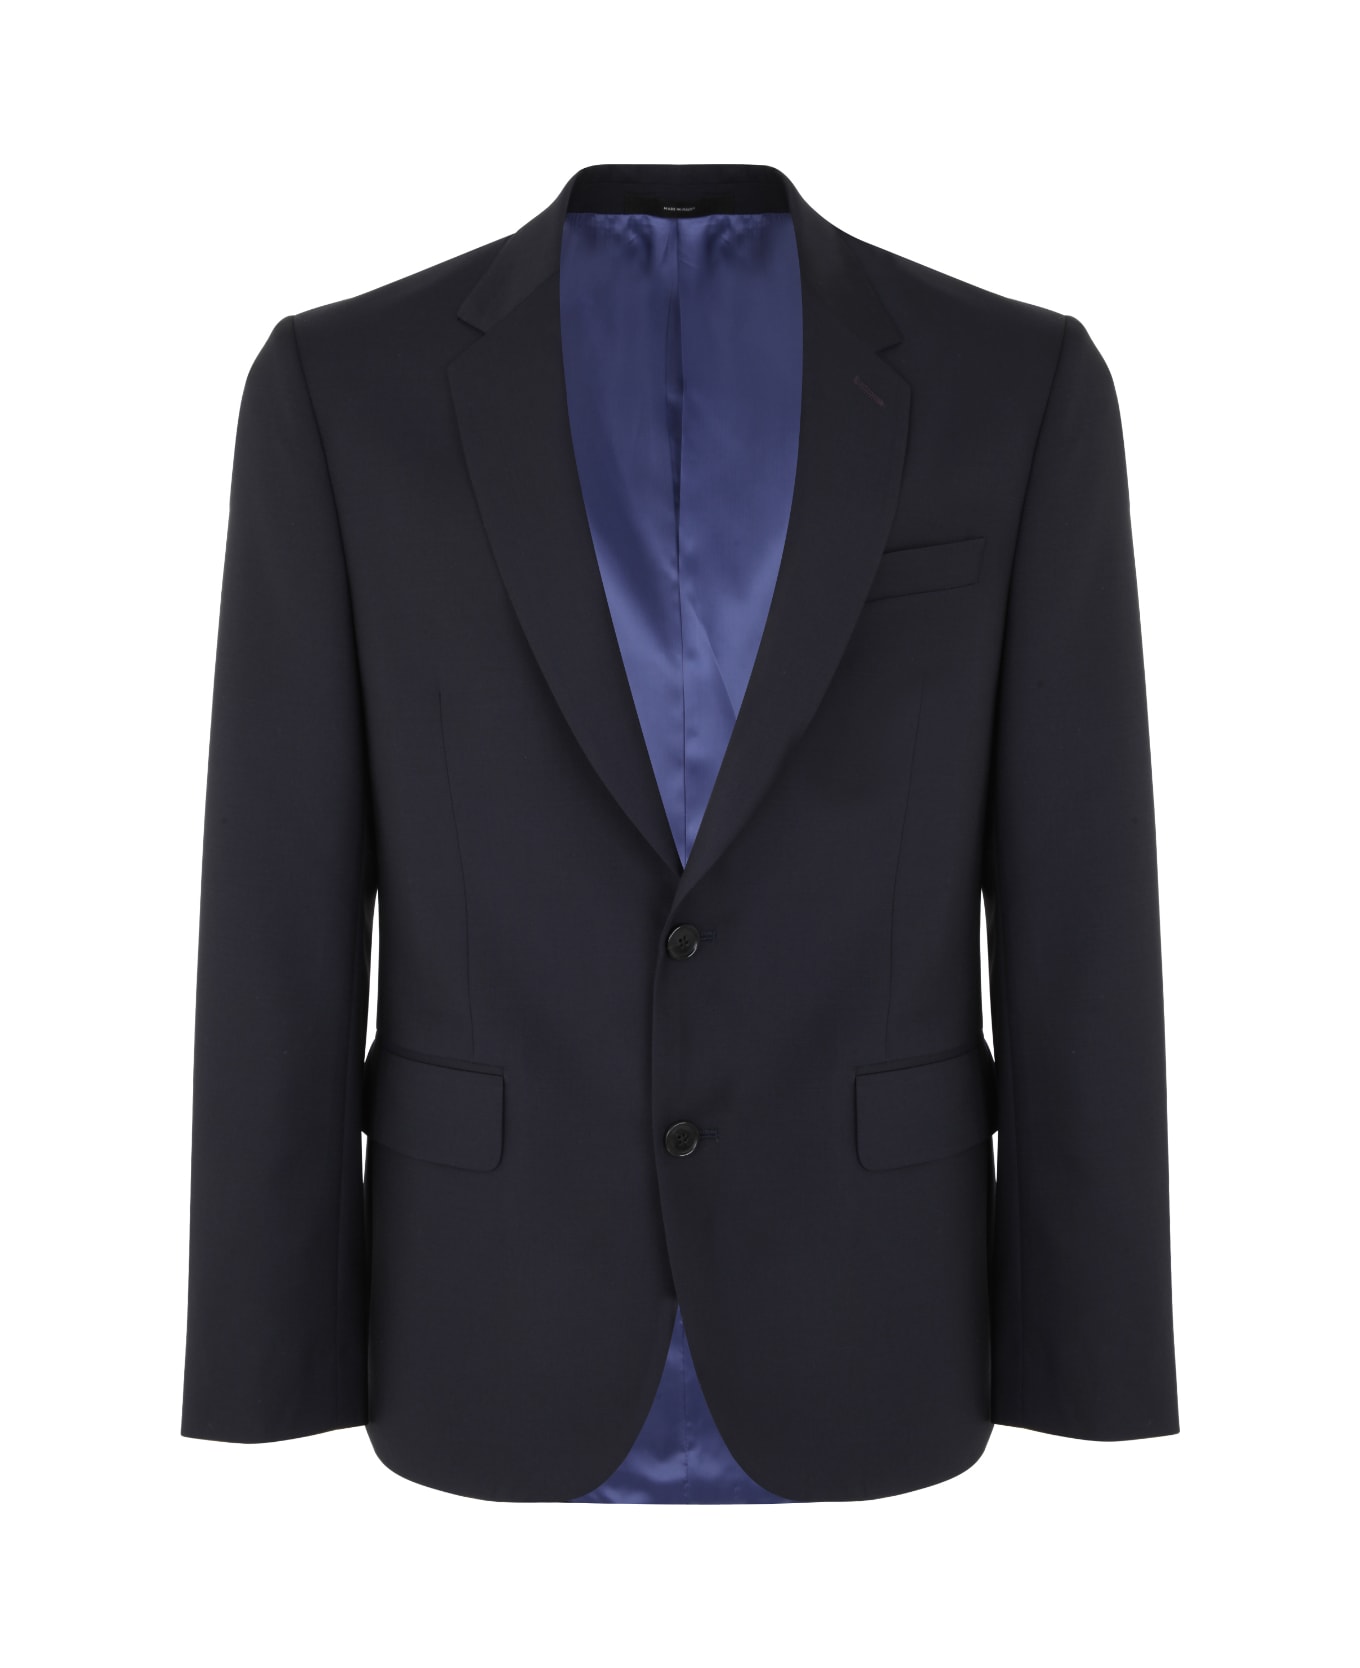 Paul Smith Mens Tailored Fit 2 Btn Jacket - Dk Na